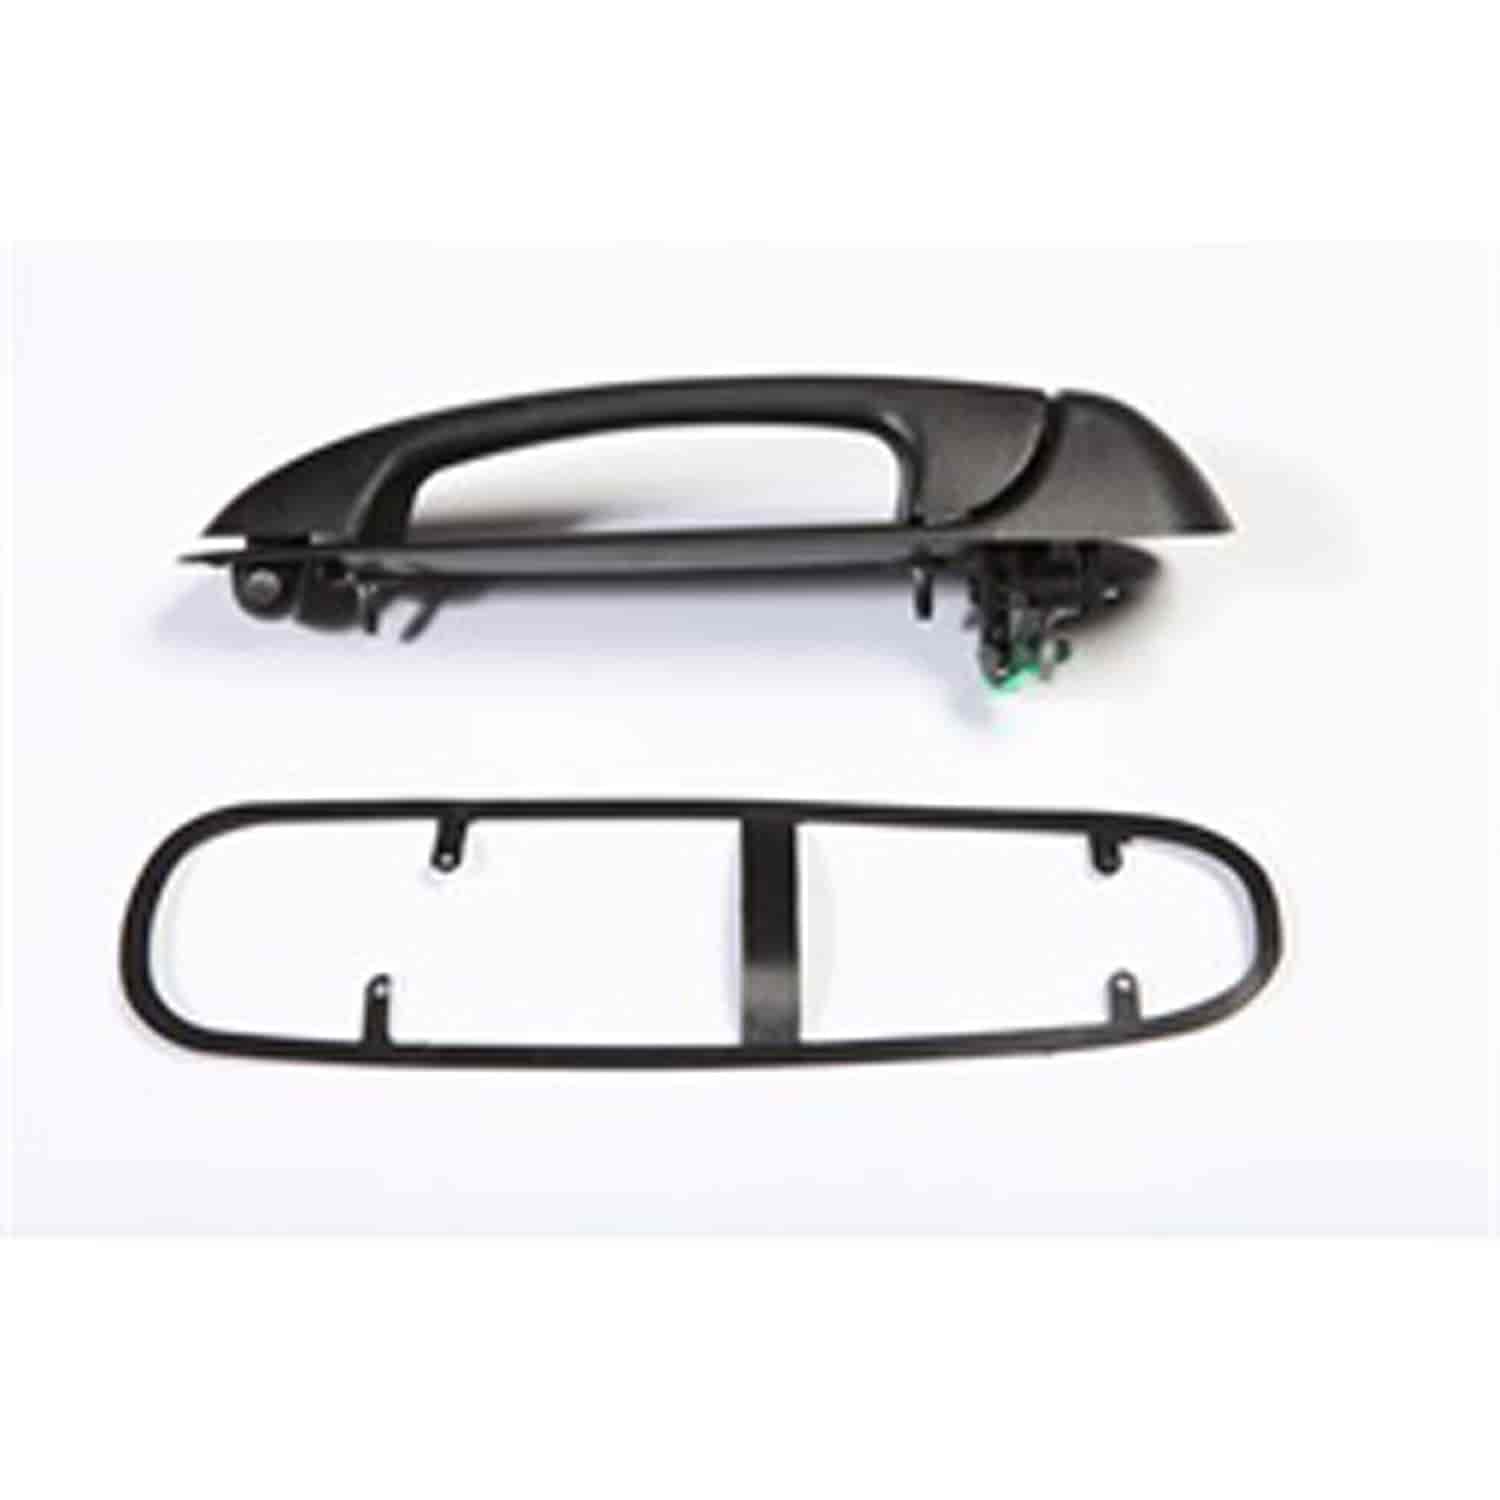 This black door handle from Omix-ADA fits the right rear door on 02-07 Jeep Liberty KJ.